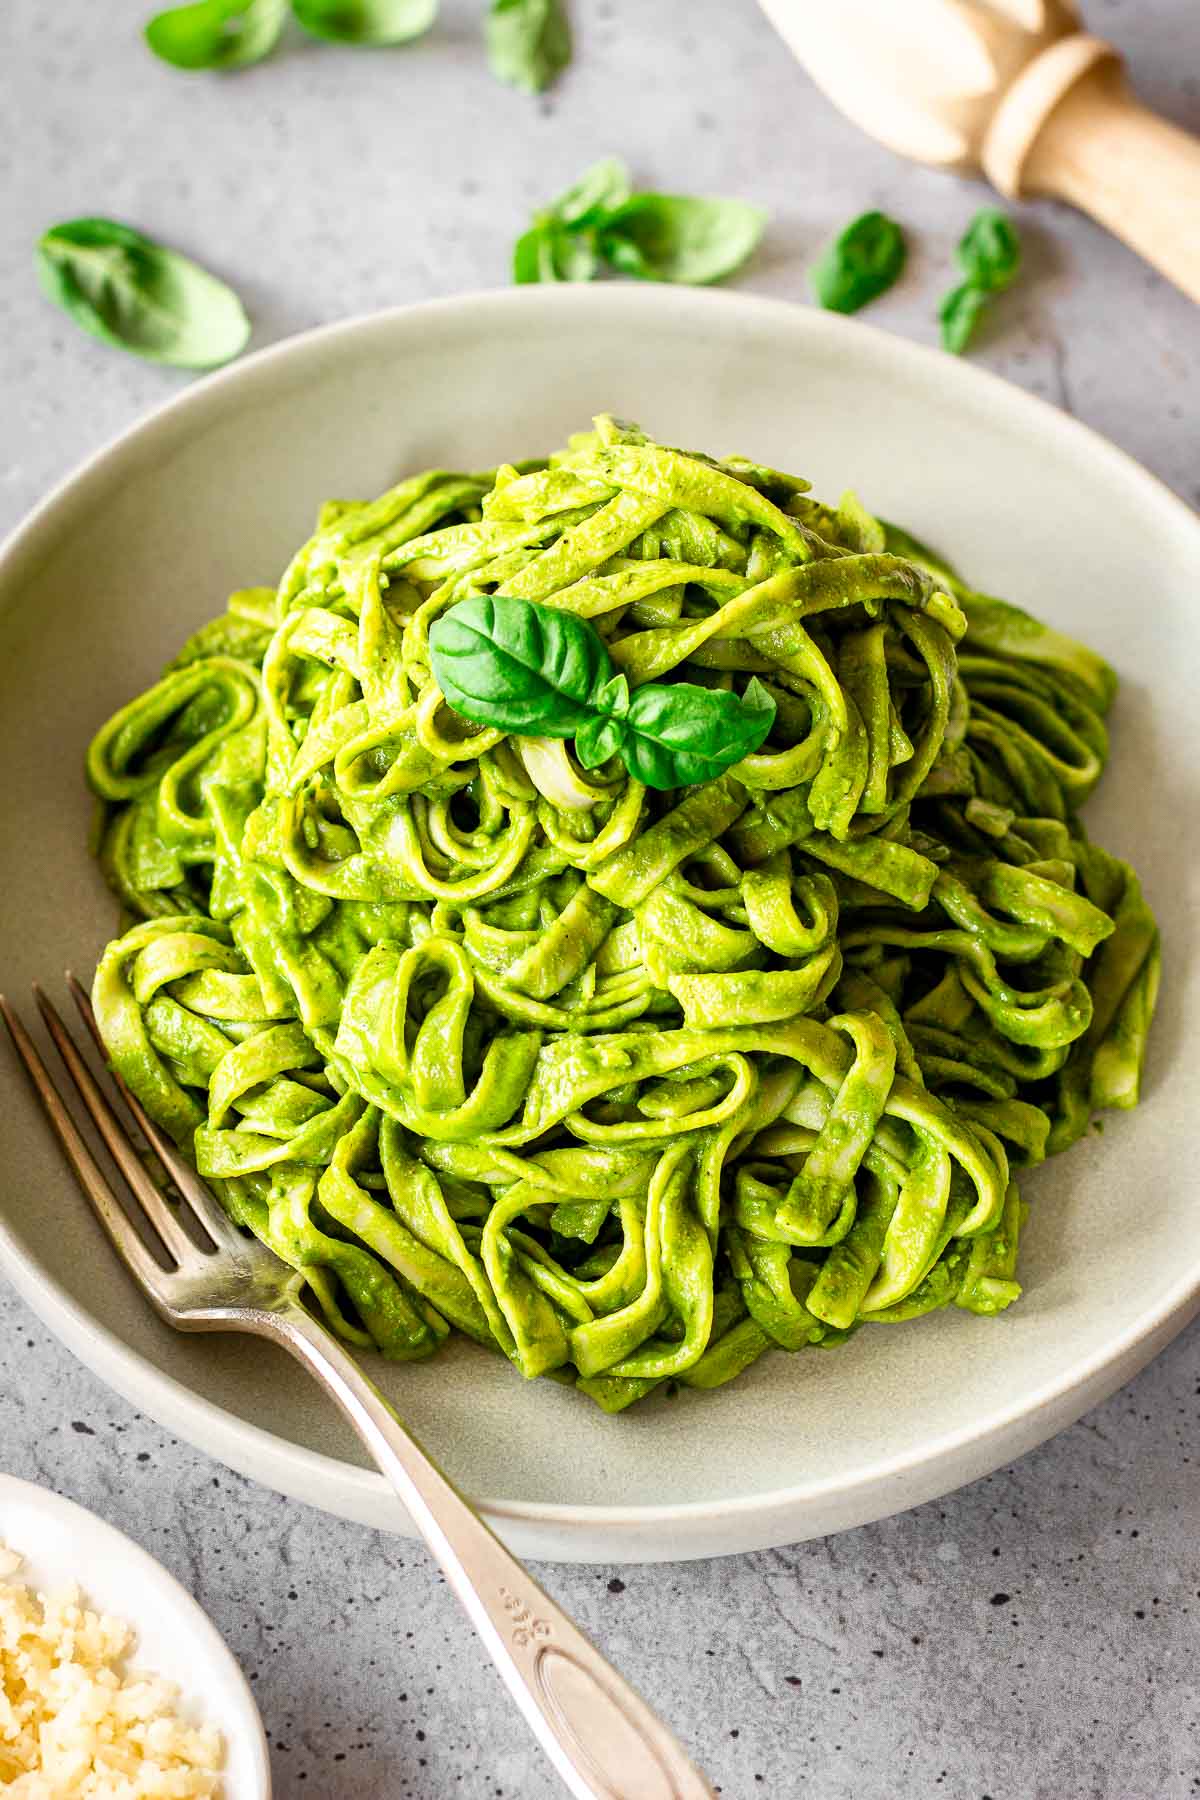 Grey plate of vegan creamy spinach pasta sauce on fettuccine. Dish is decorated with basil leaves and there is a fork nestled into the plate. A dish of vegan cheese is off to one side.